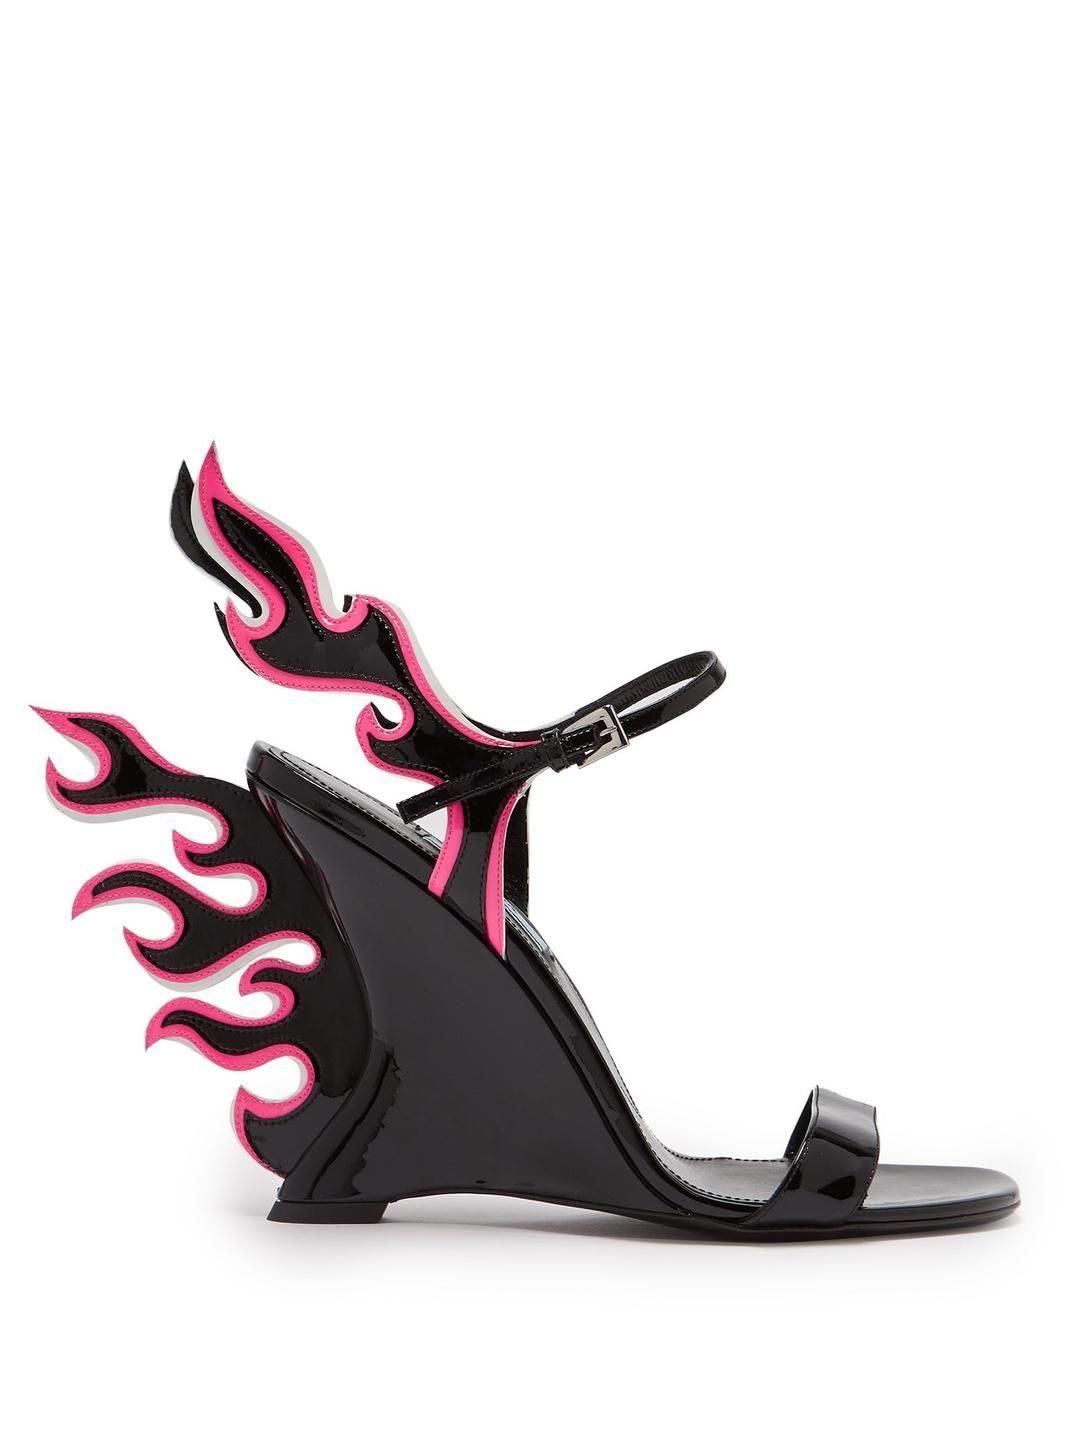 Prada's Flame Heels Are Lighting Up the Internet | Who What Wear